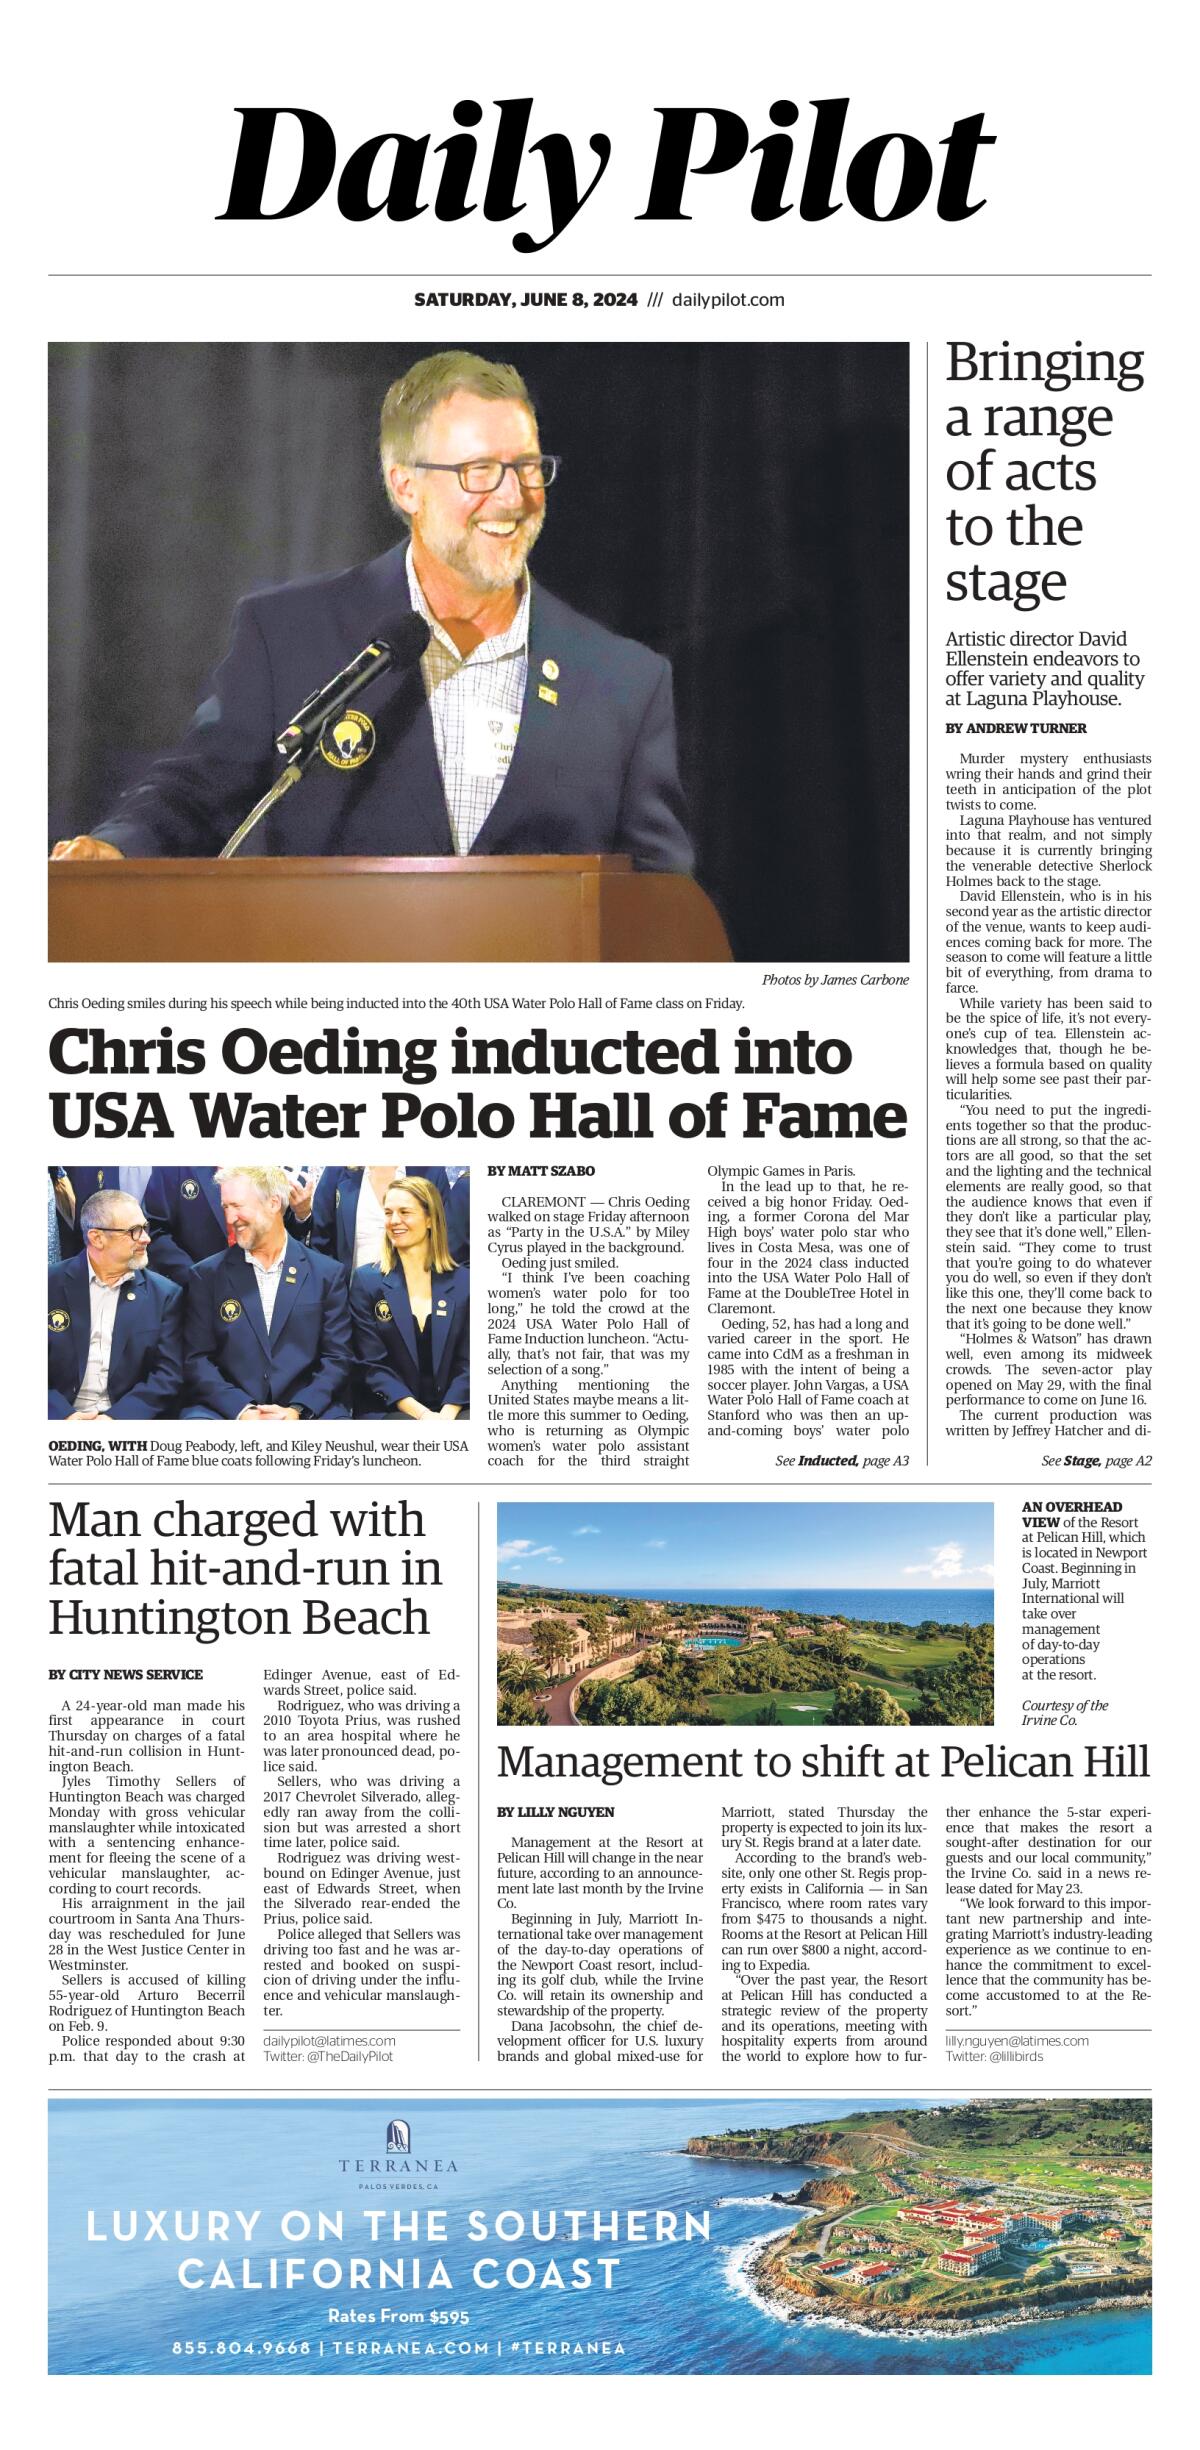 Front page of the Daily Pilot e-newspaper for Saturday, June 8, 2024.